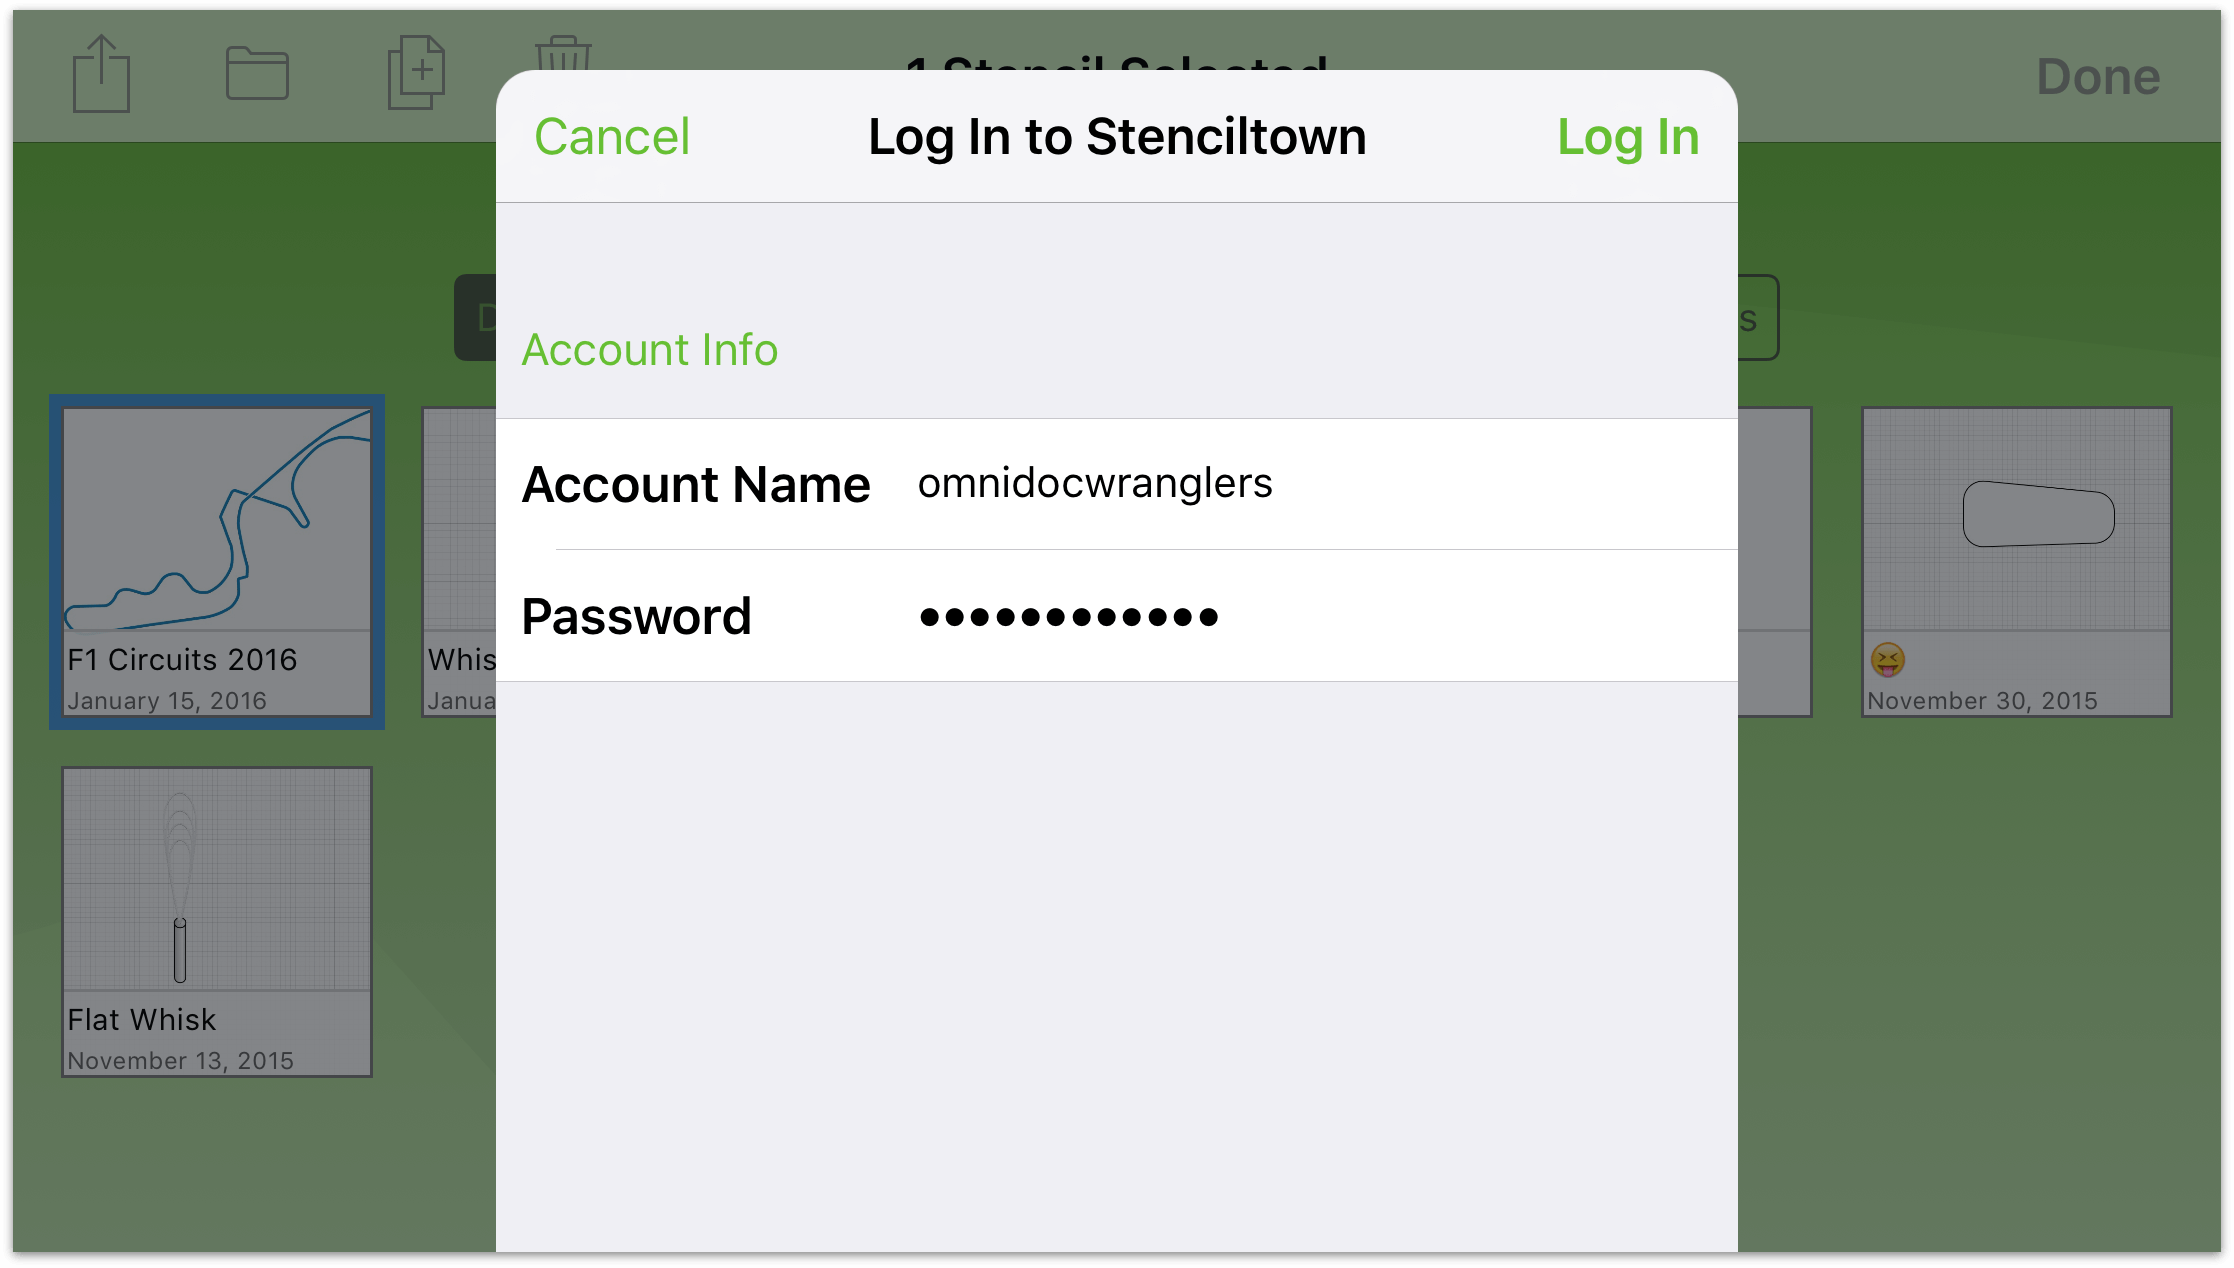 Enter your Omni ID and Password to log in to Stenciltown